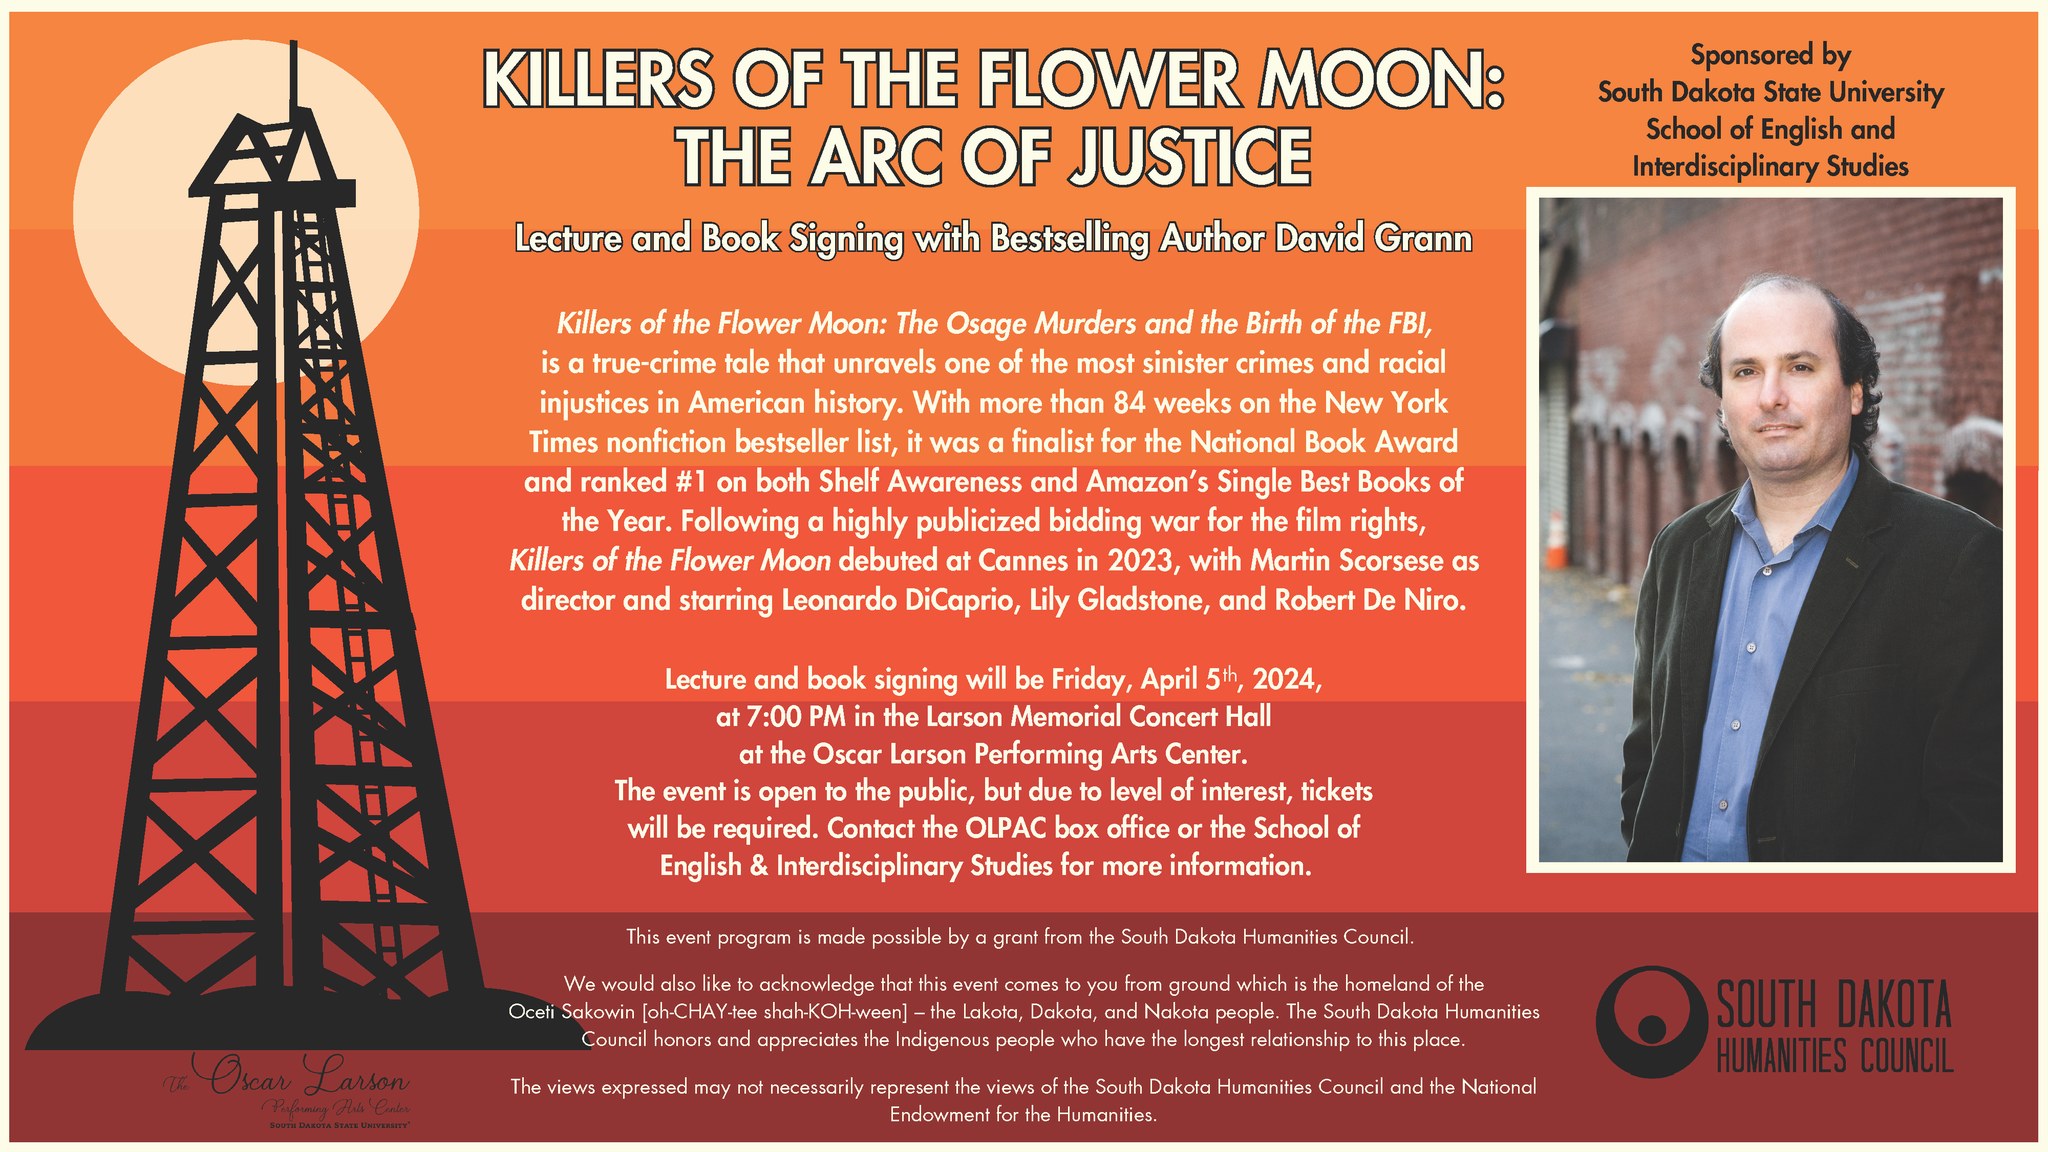 Killers of the Flower Moon: The Arc of Justice Lecture and Book Signing with Author David Grann